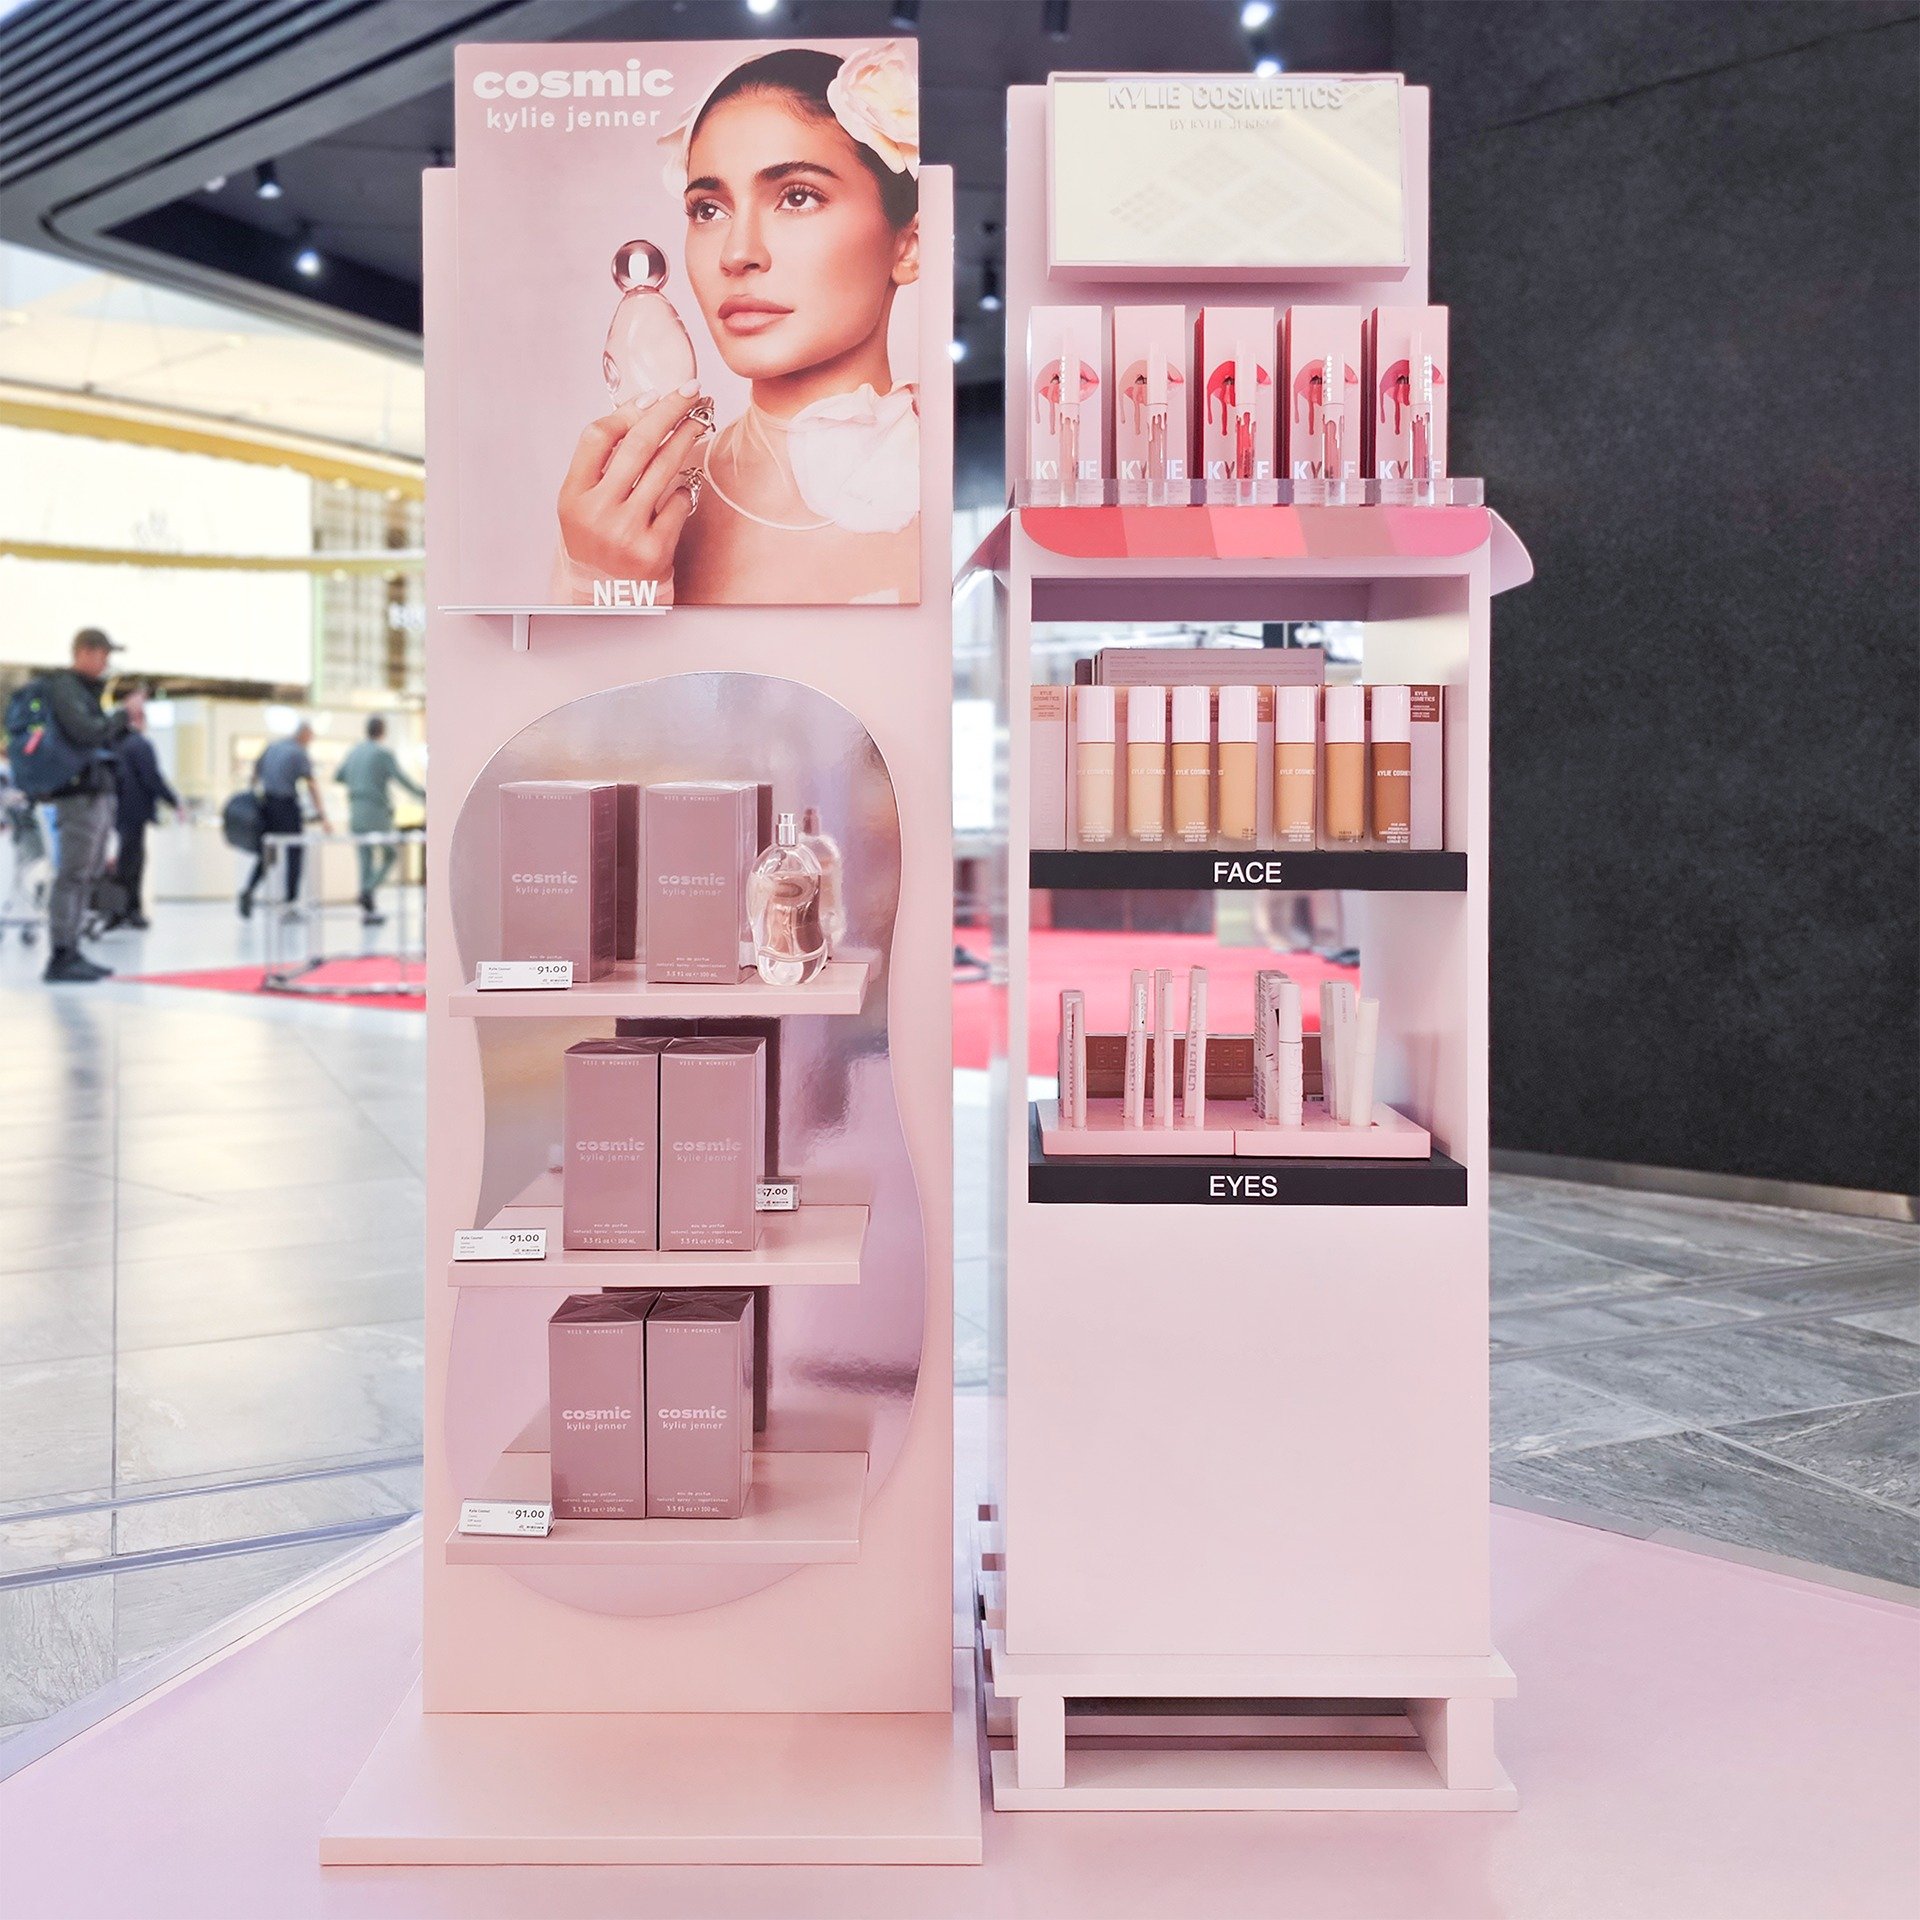 Blush pink tiered units &amp; soft organic bends, truly bespoke fabrication for the #popuplaunch of #CosmicKylie by @kyliecosmetics for @cotydutyfree_anz at #SydneyInternationalAirport

Installation: @artandsoul.com.au
Spatial design &amp; Fabricatio